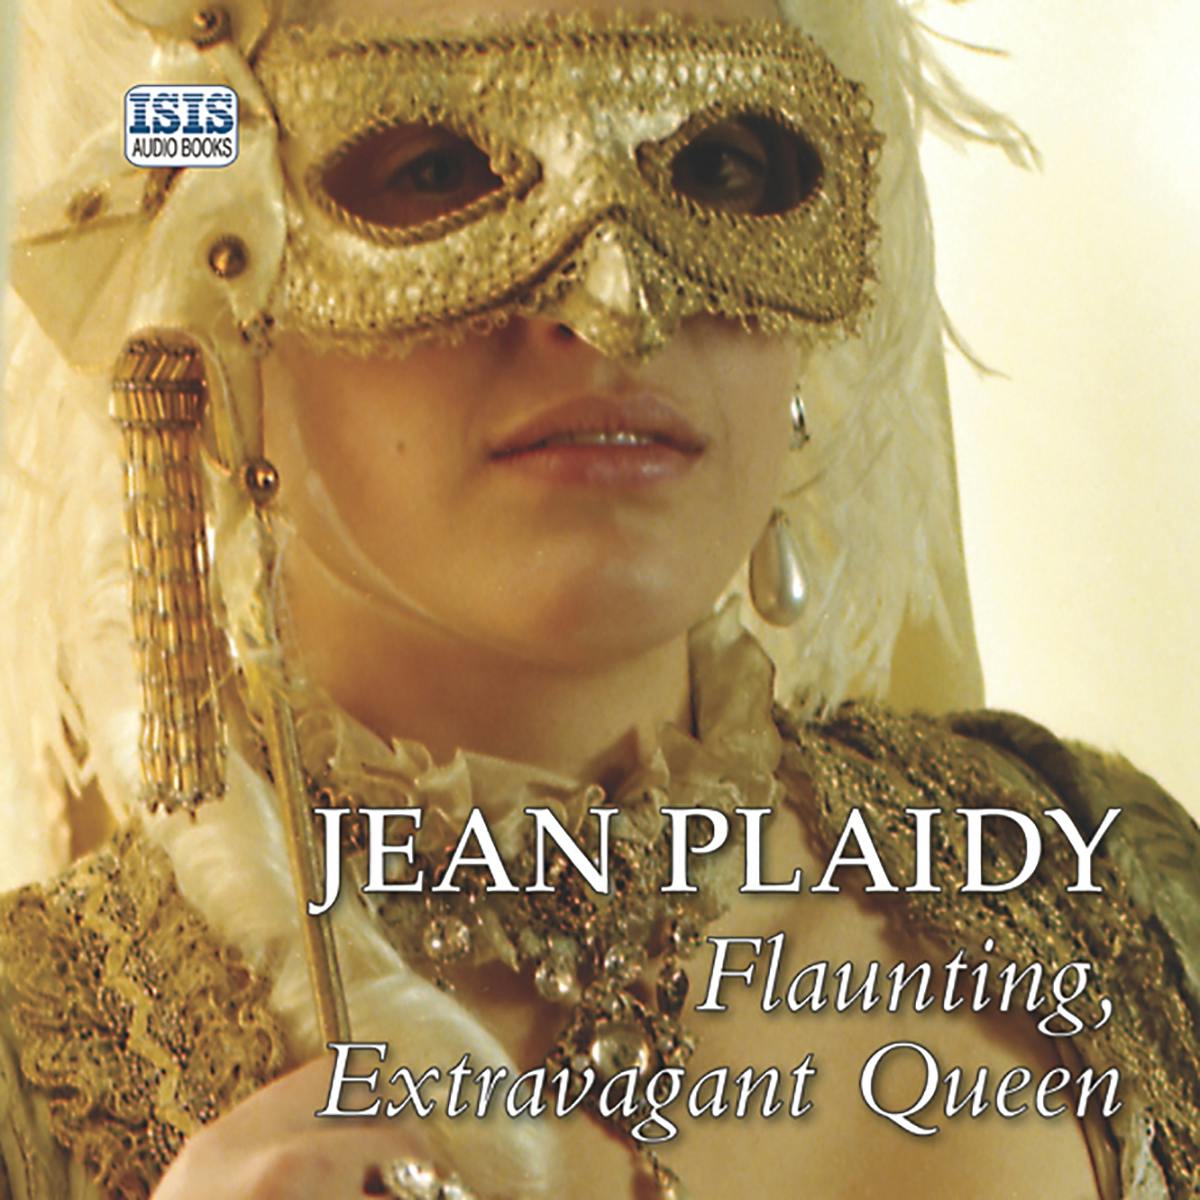 Flaunting, Extravagant Queen - Jean Plaidy